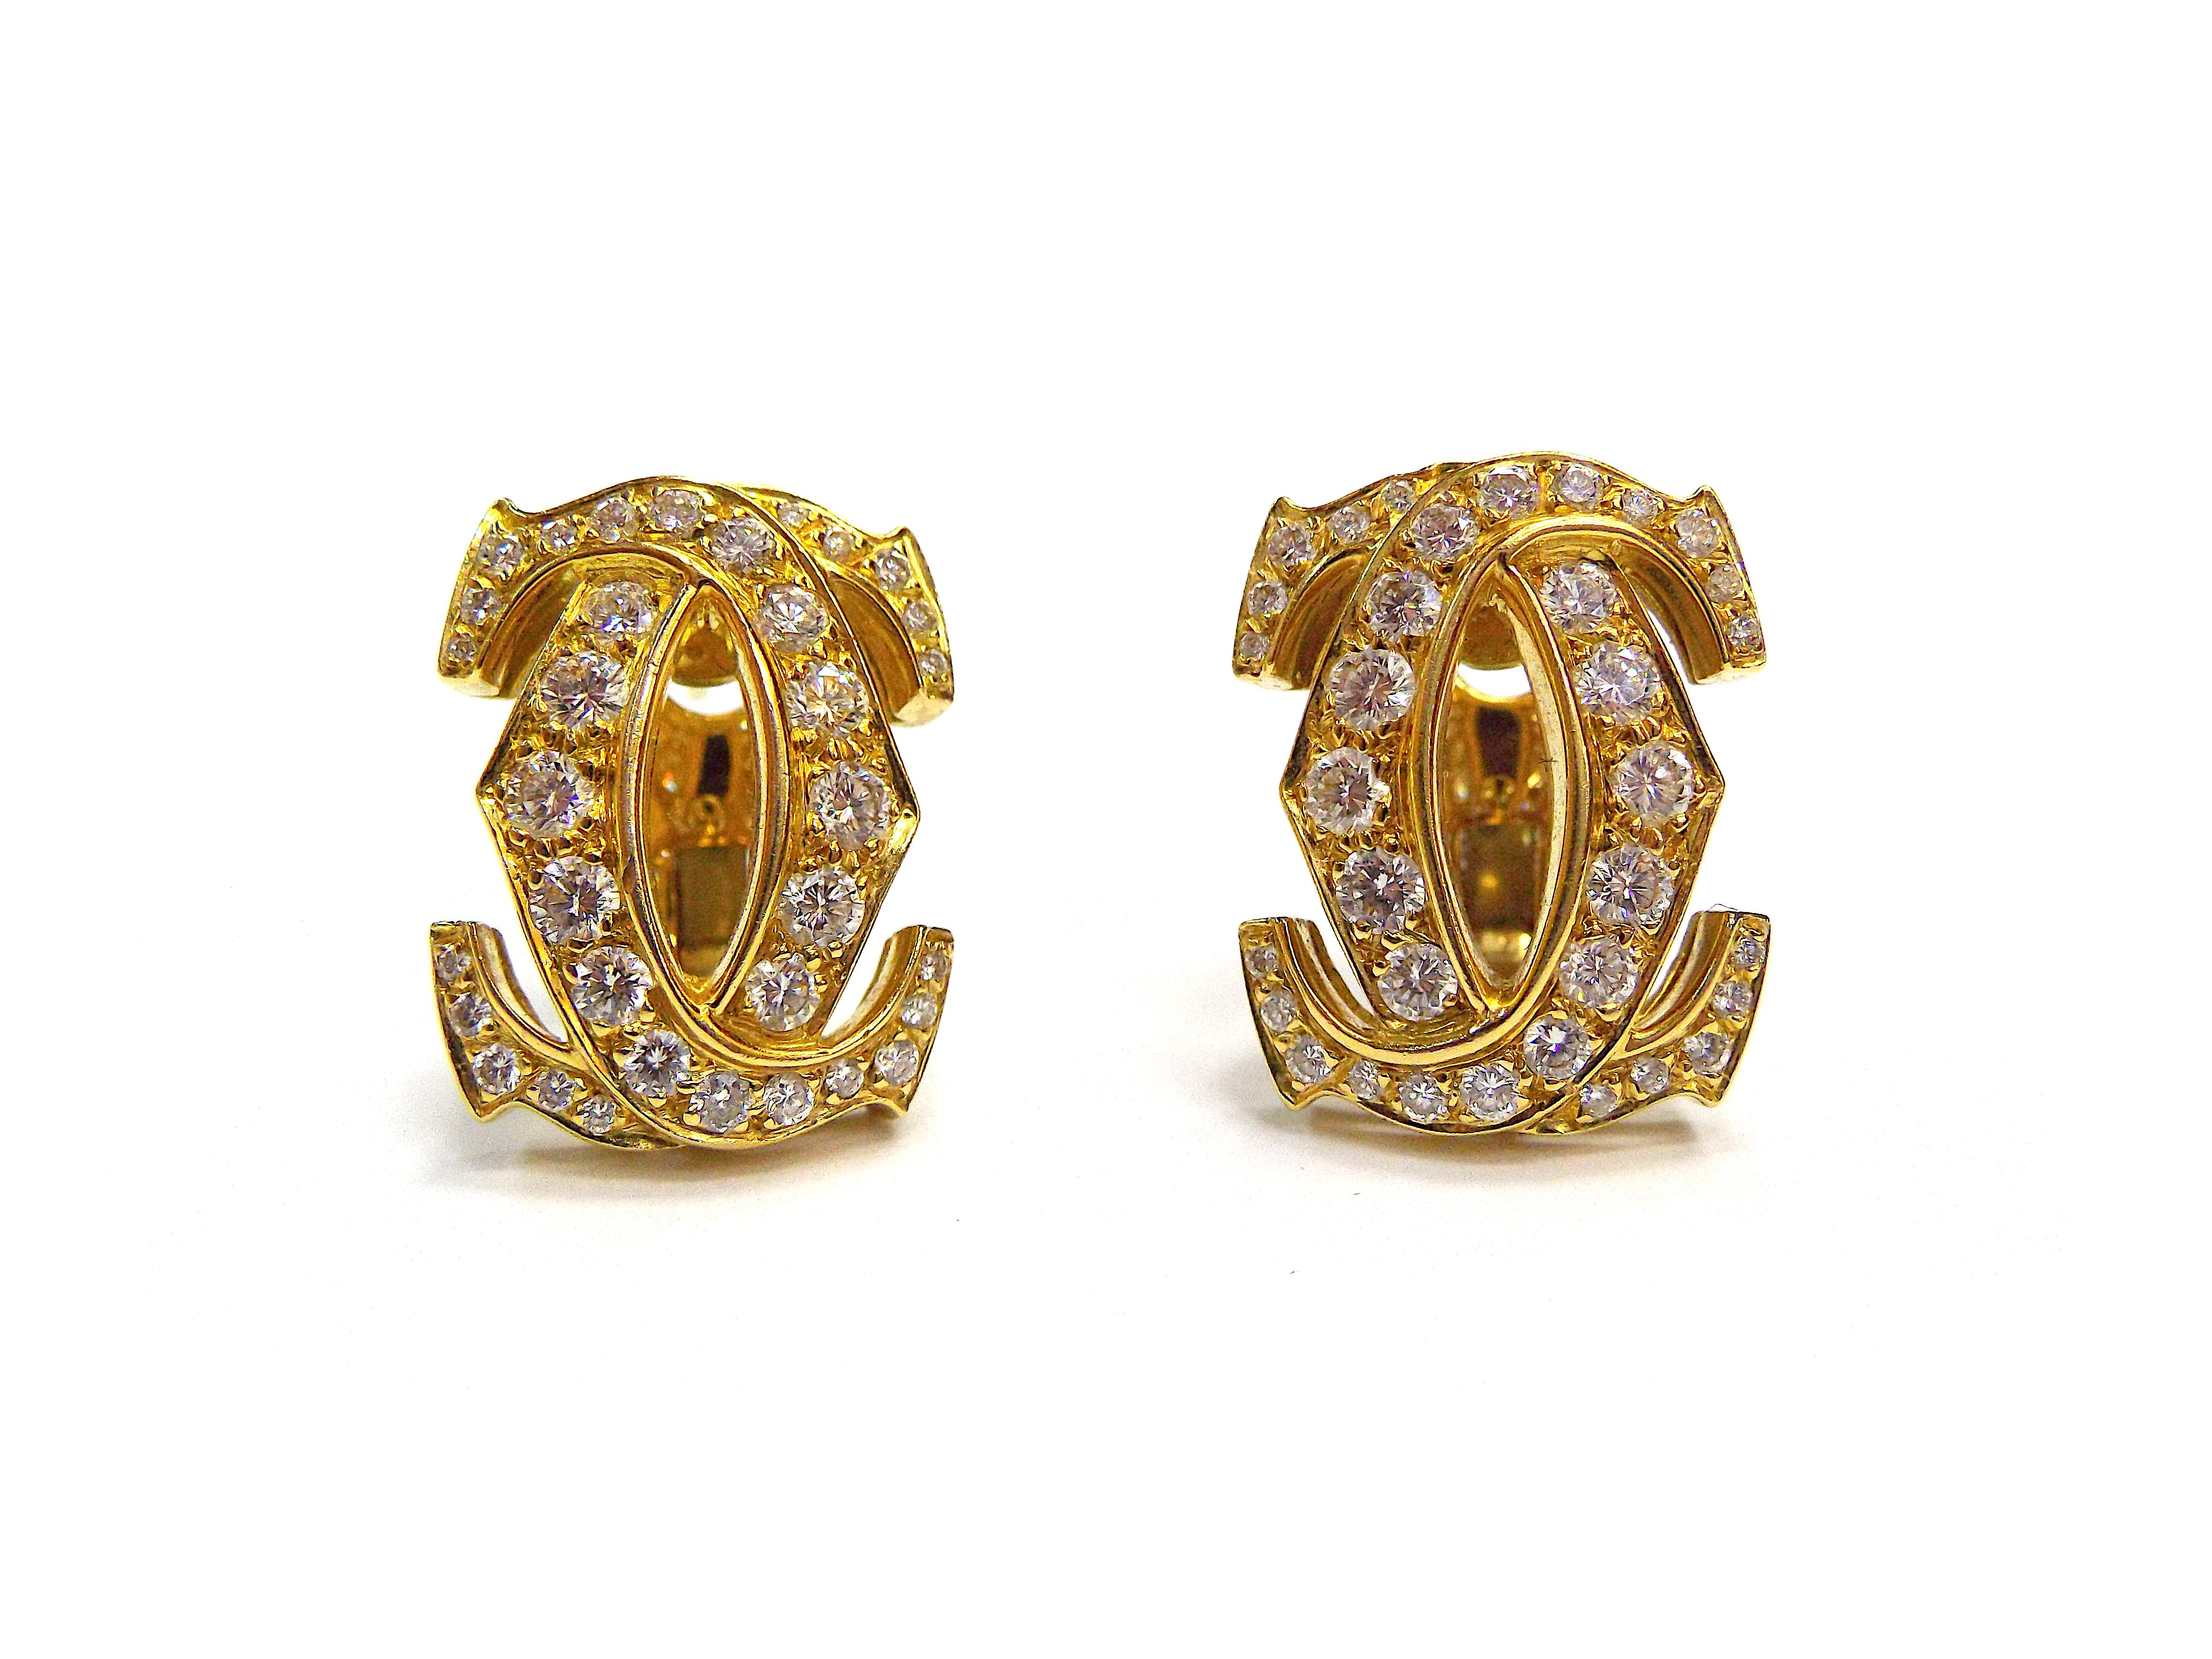 A pair of elegant earrings by Cartier from the Double C collection. Mounted in 18k yellow gold, featuring approx. 2.40 ct of diamonds. Signed Cartier, numbered, with French essay marks. The earring dimensions are 2.1cm x 1.7cm. The weight is approx.